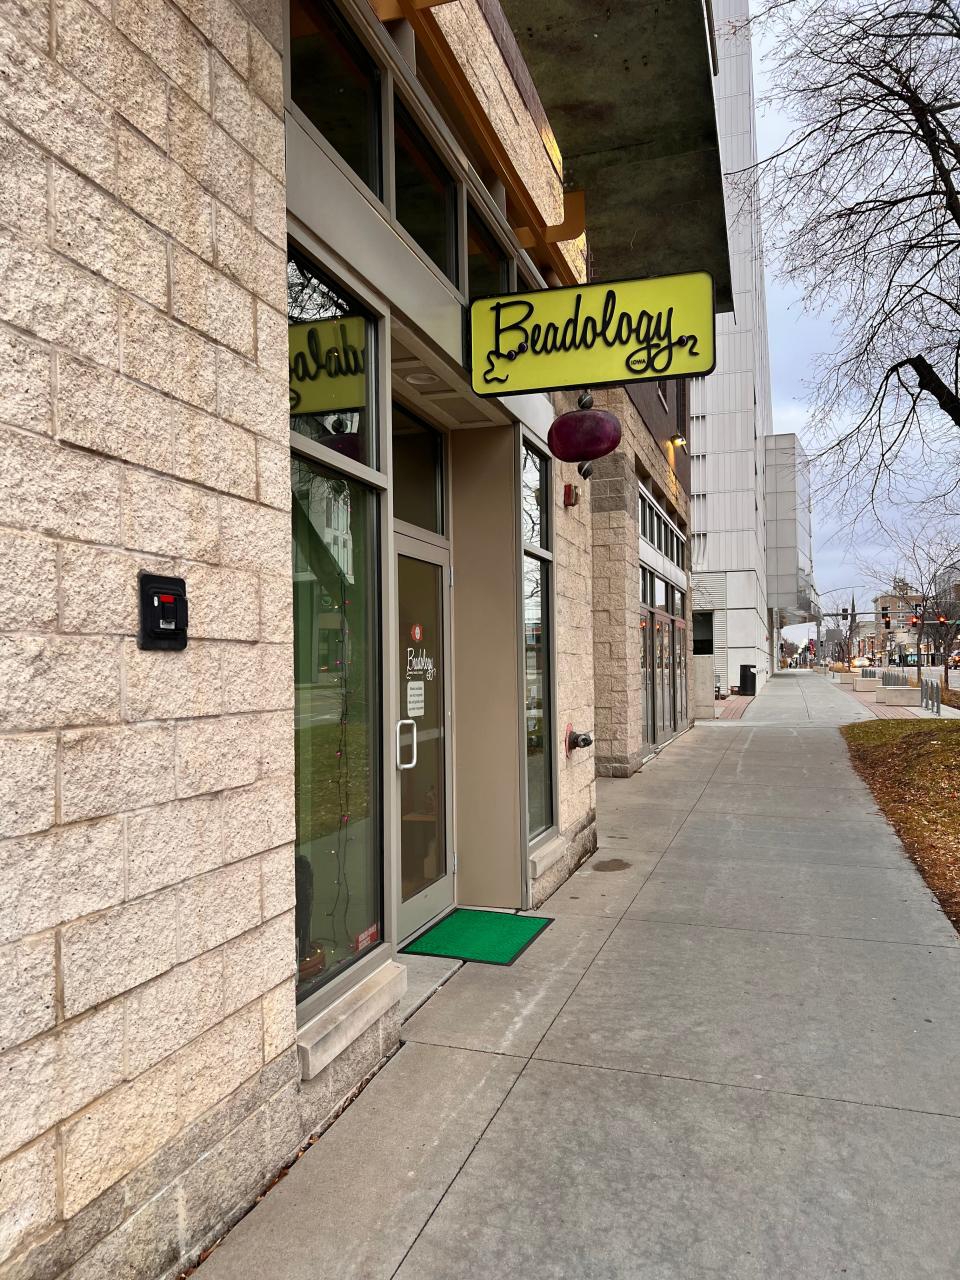 Beadology is located at 355 S Clinton St. and is one of Iowa City's many "third places."